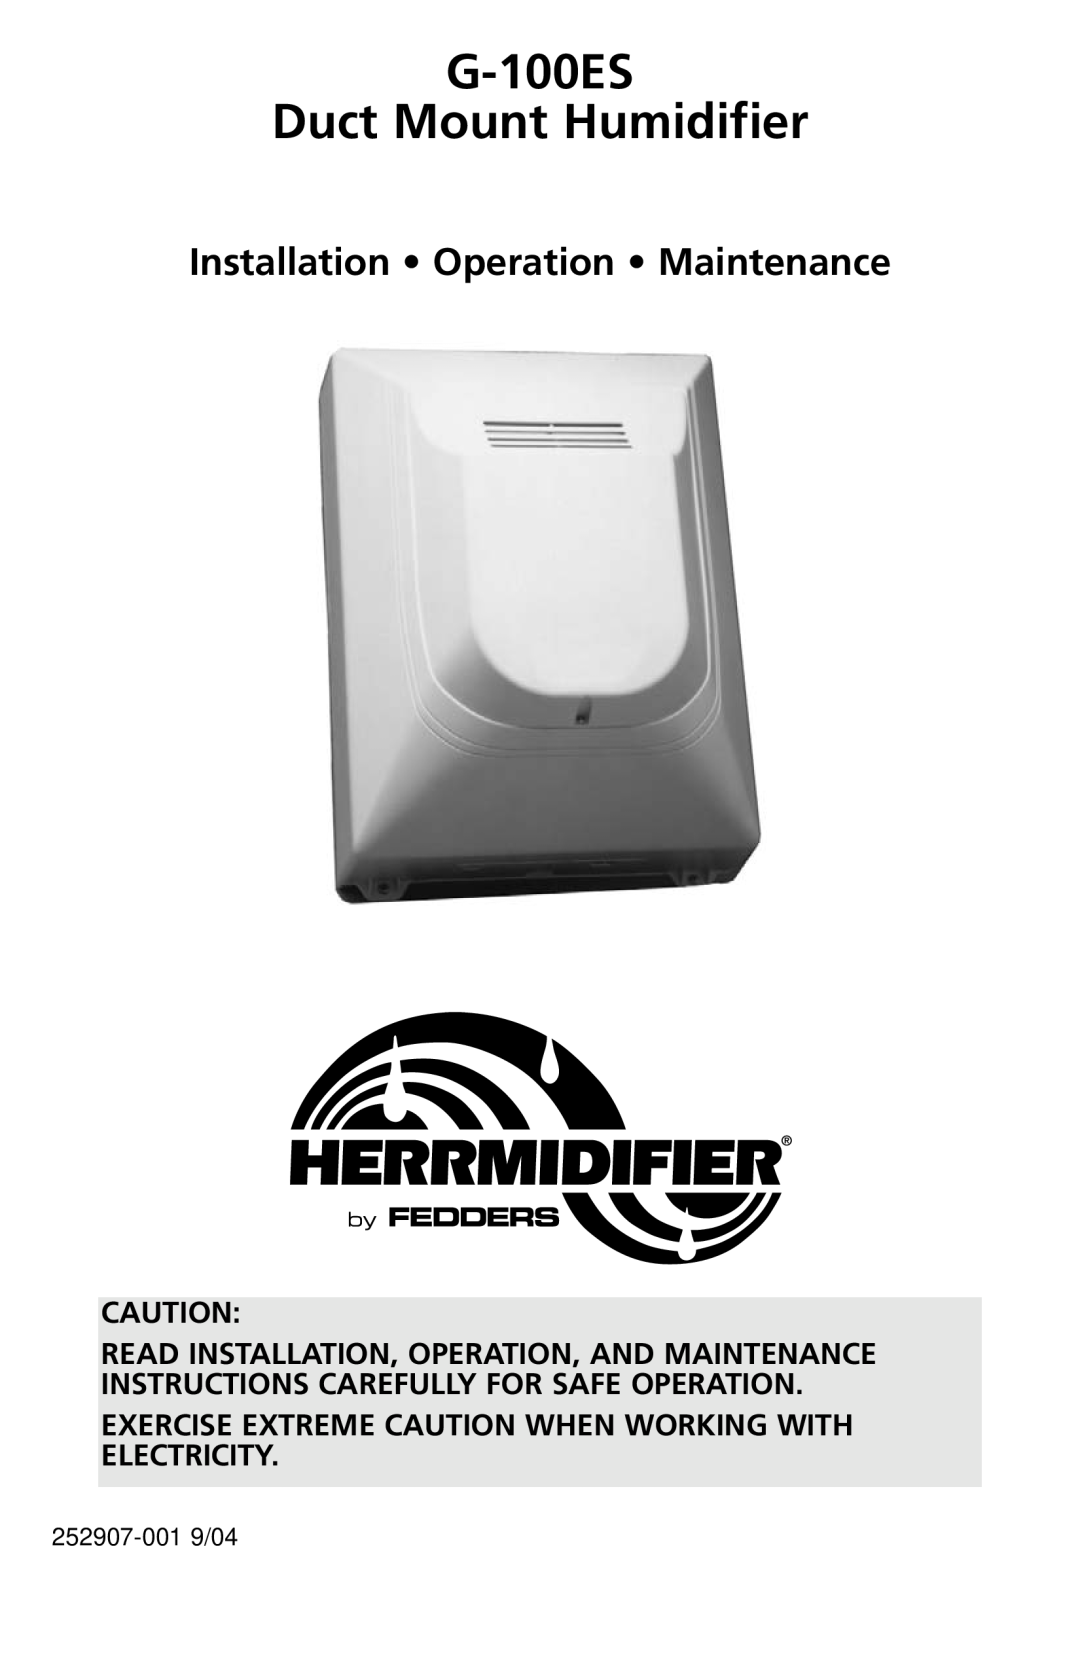 Herrmidifier Co manual G-100ES Duct Mount Humidifier, Installation Operation Maintenance, 252907-0019/04 